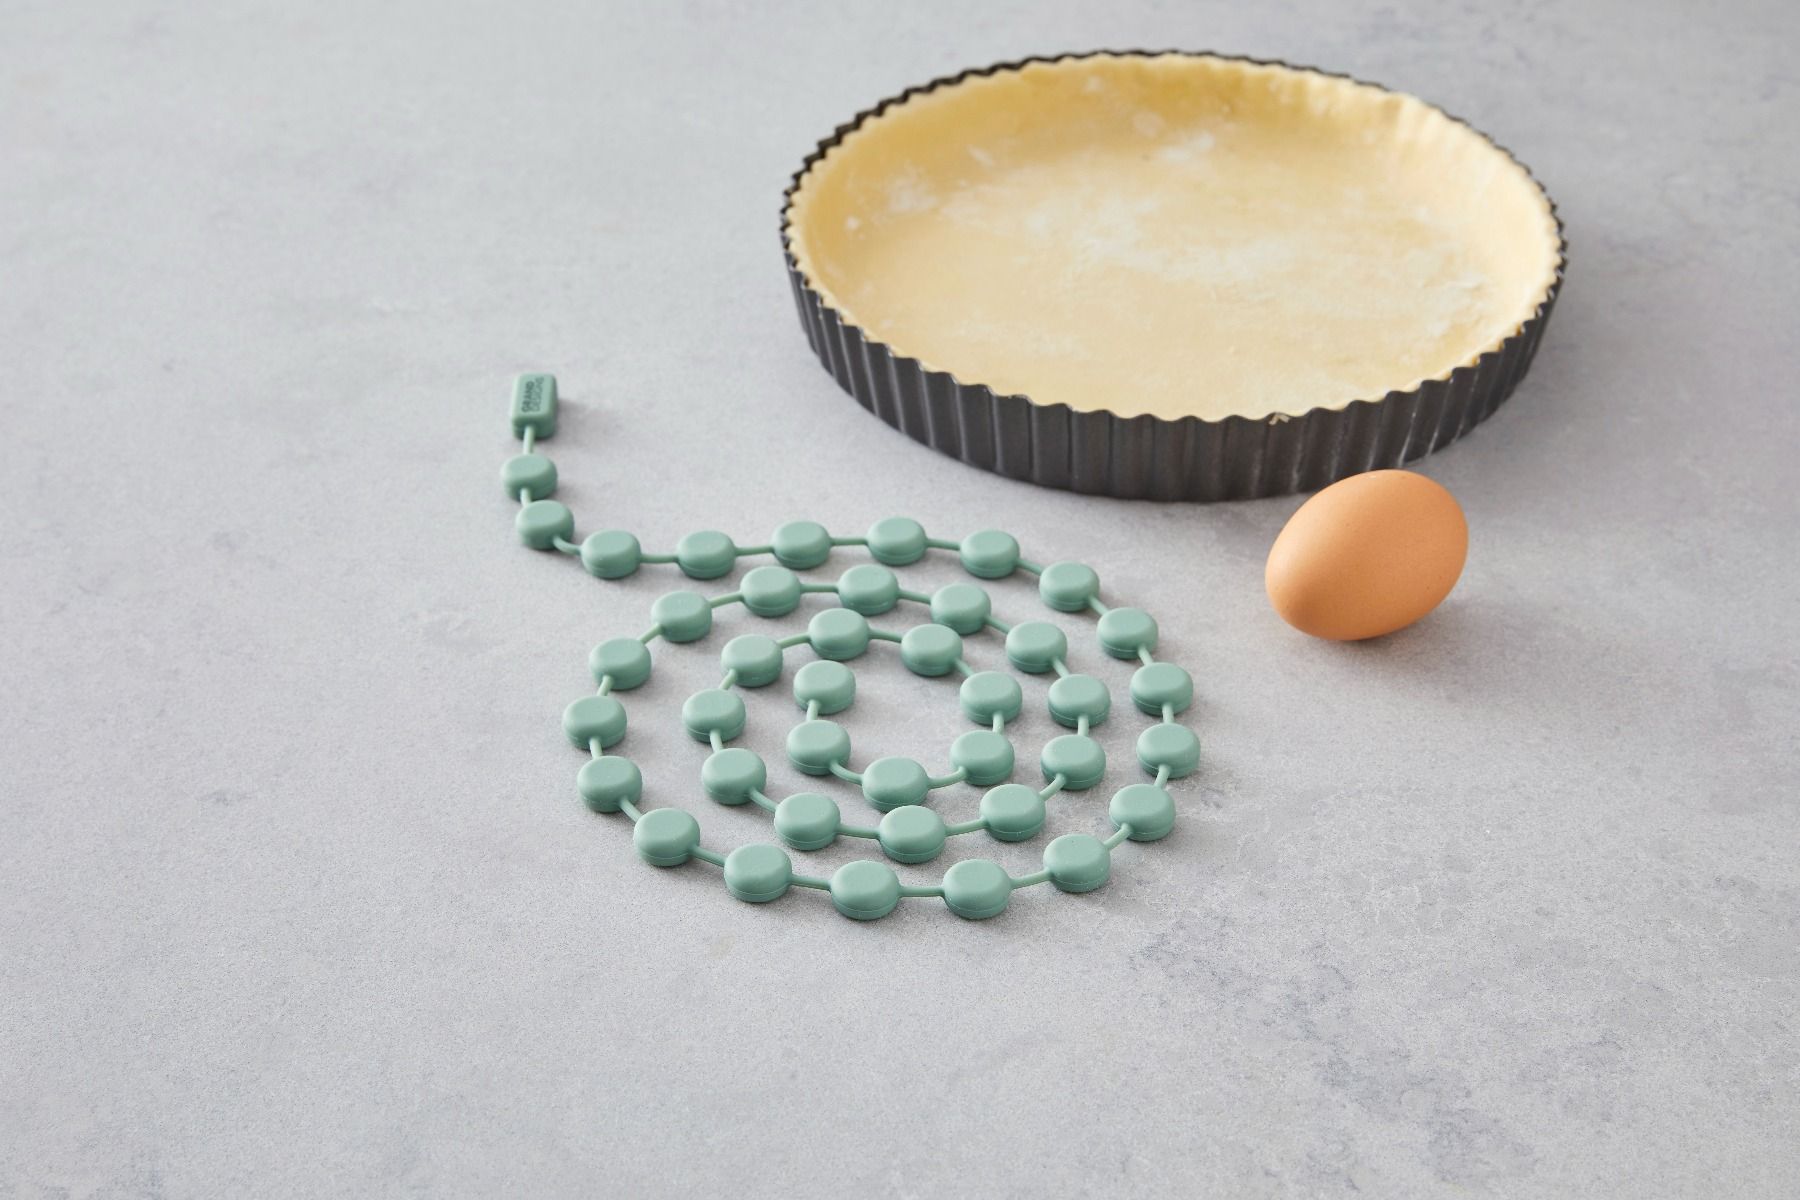 Grand Designs 2-in-1 Pie Weight & Trivet Product Image 3